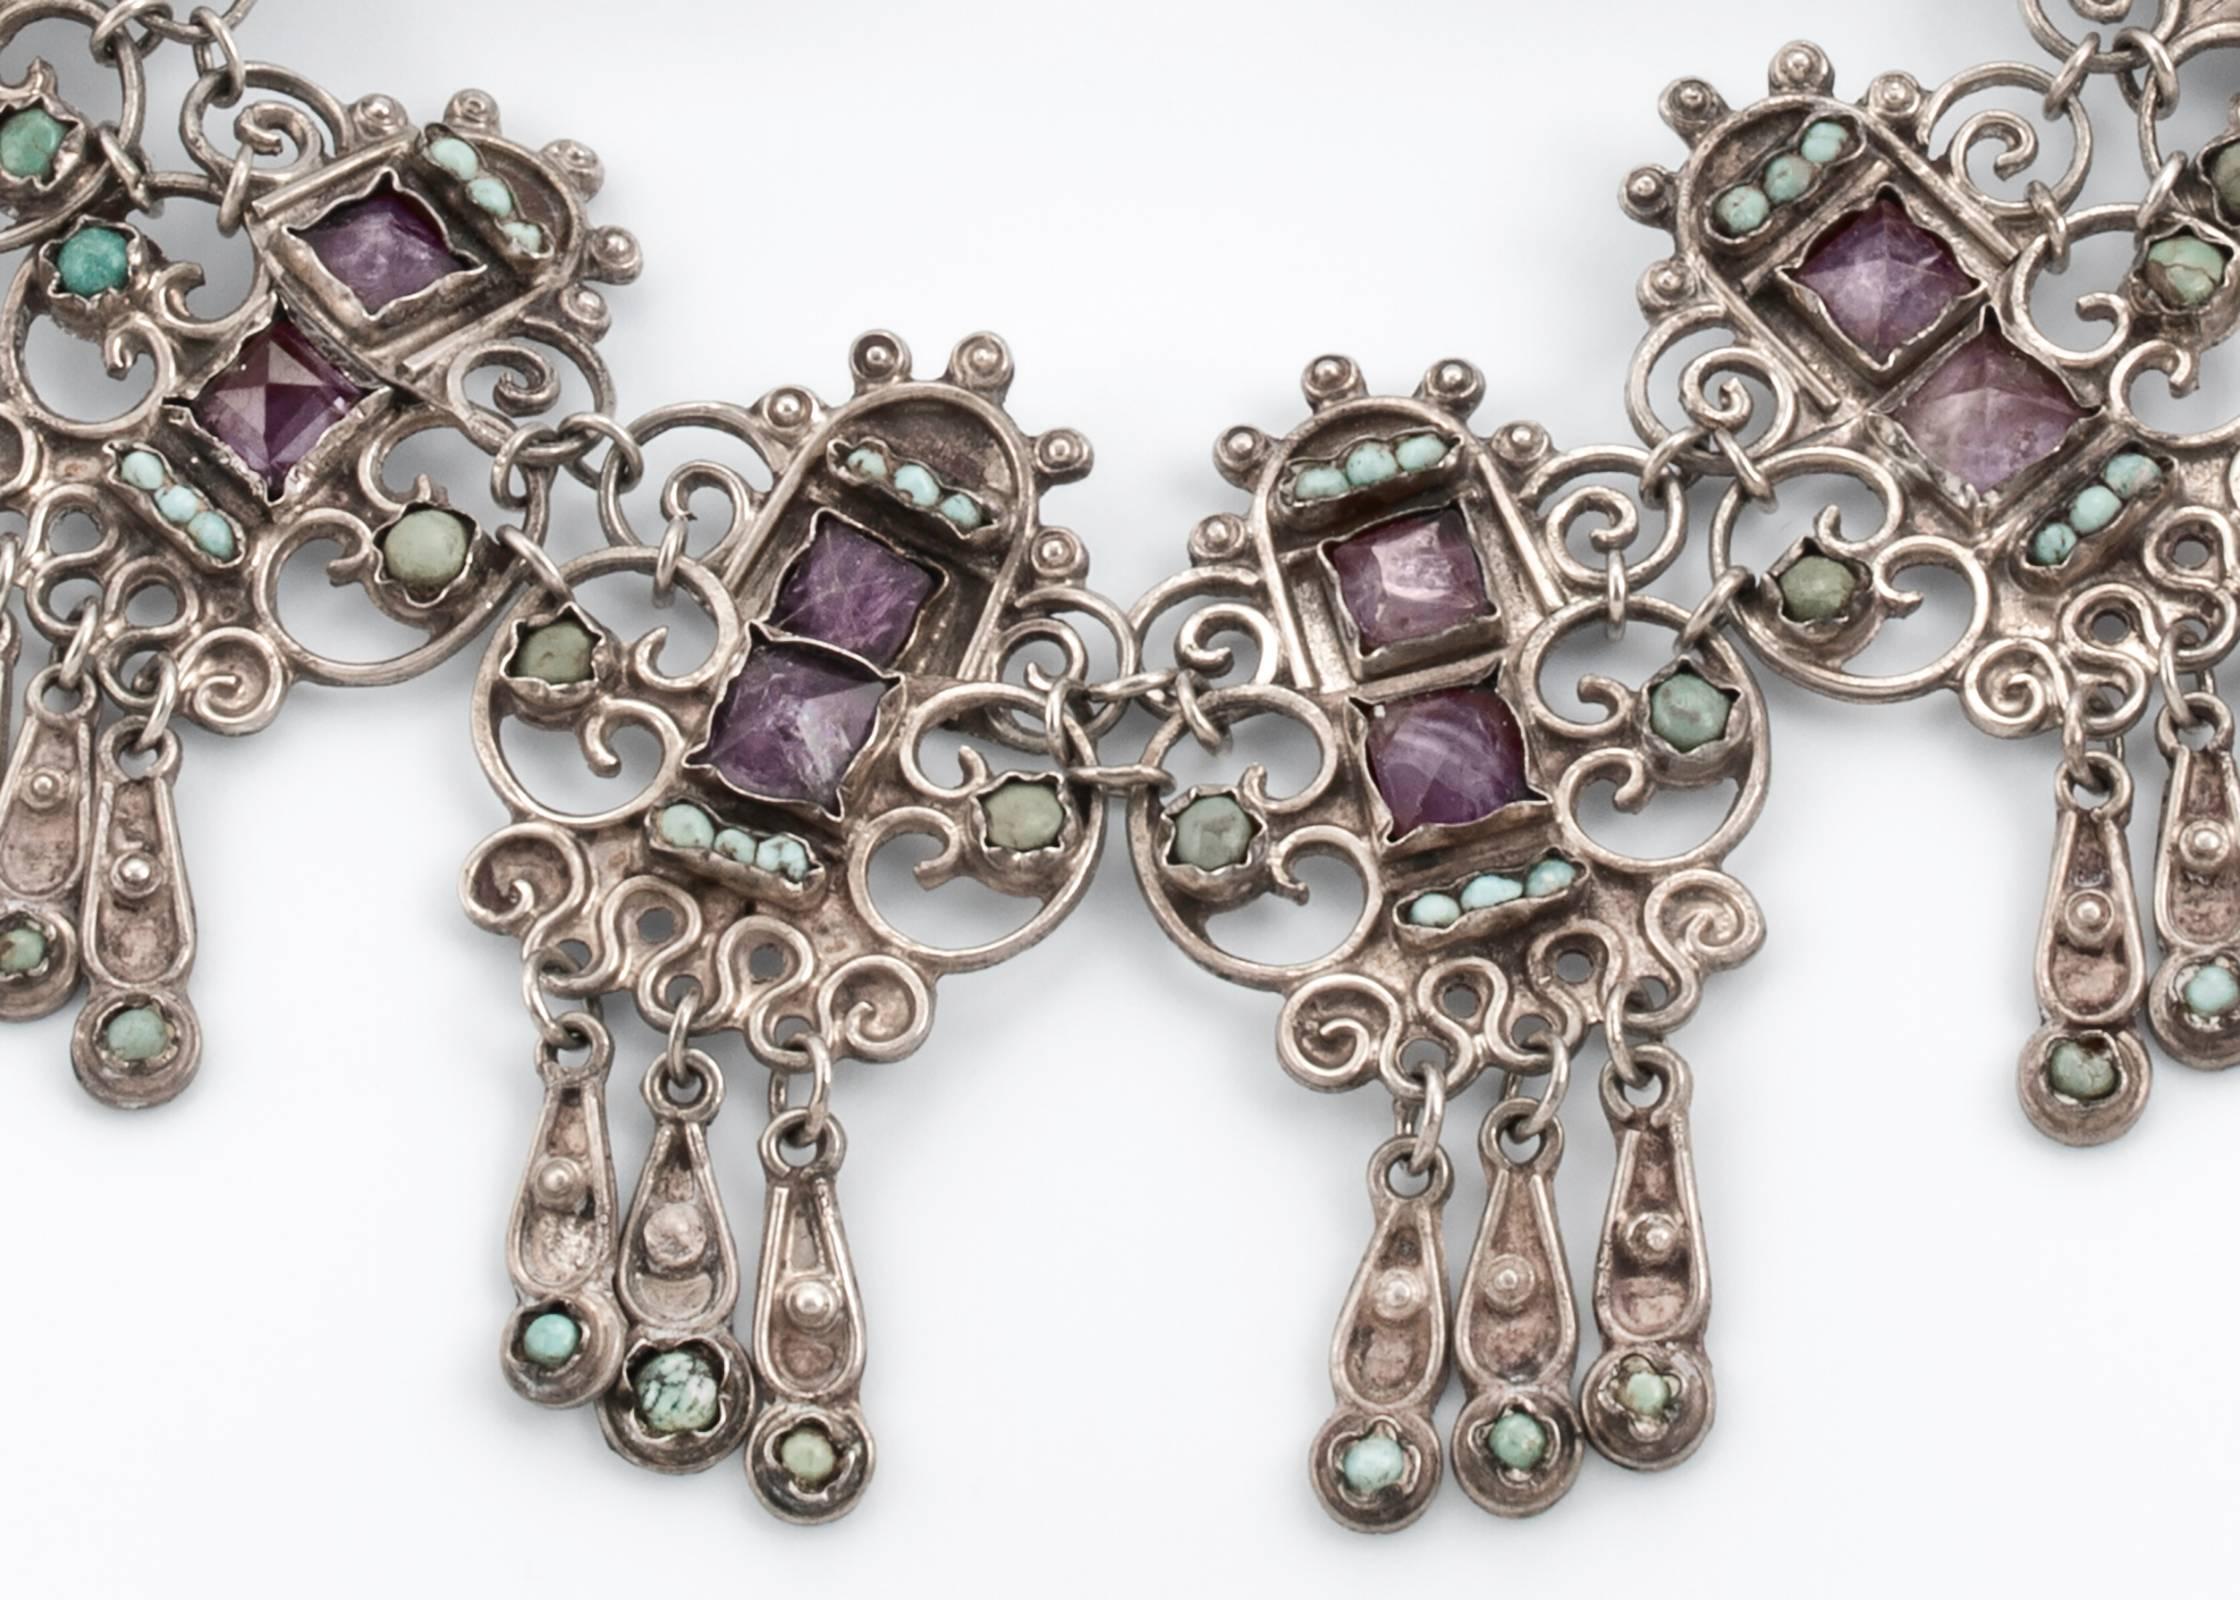 Dramatic bib style necklace.  Mexican Sterling silver embedded with amethyst and turquoise.  There are 17 links, about 1